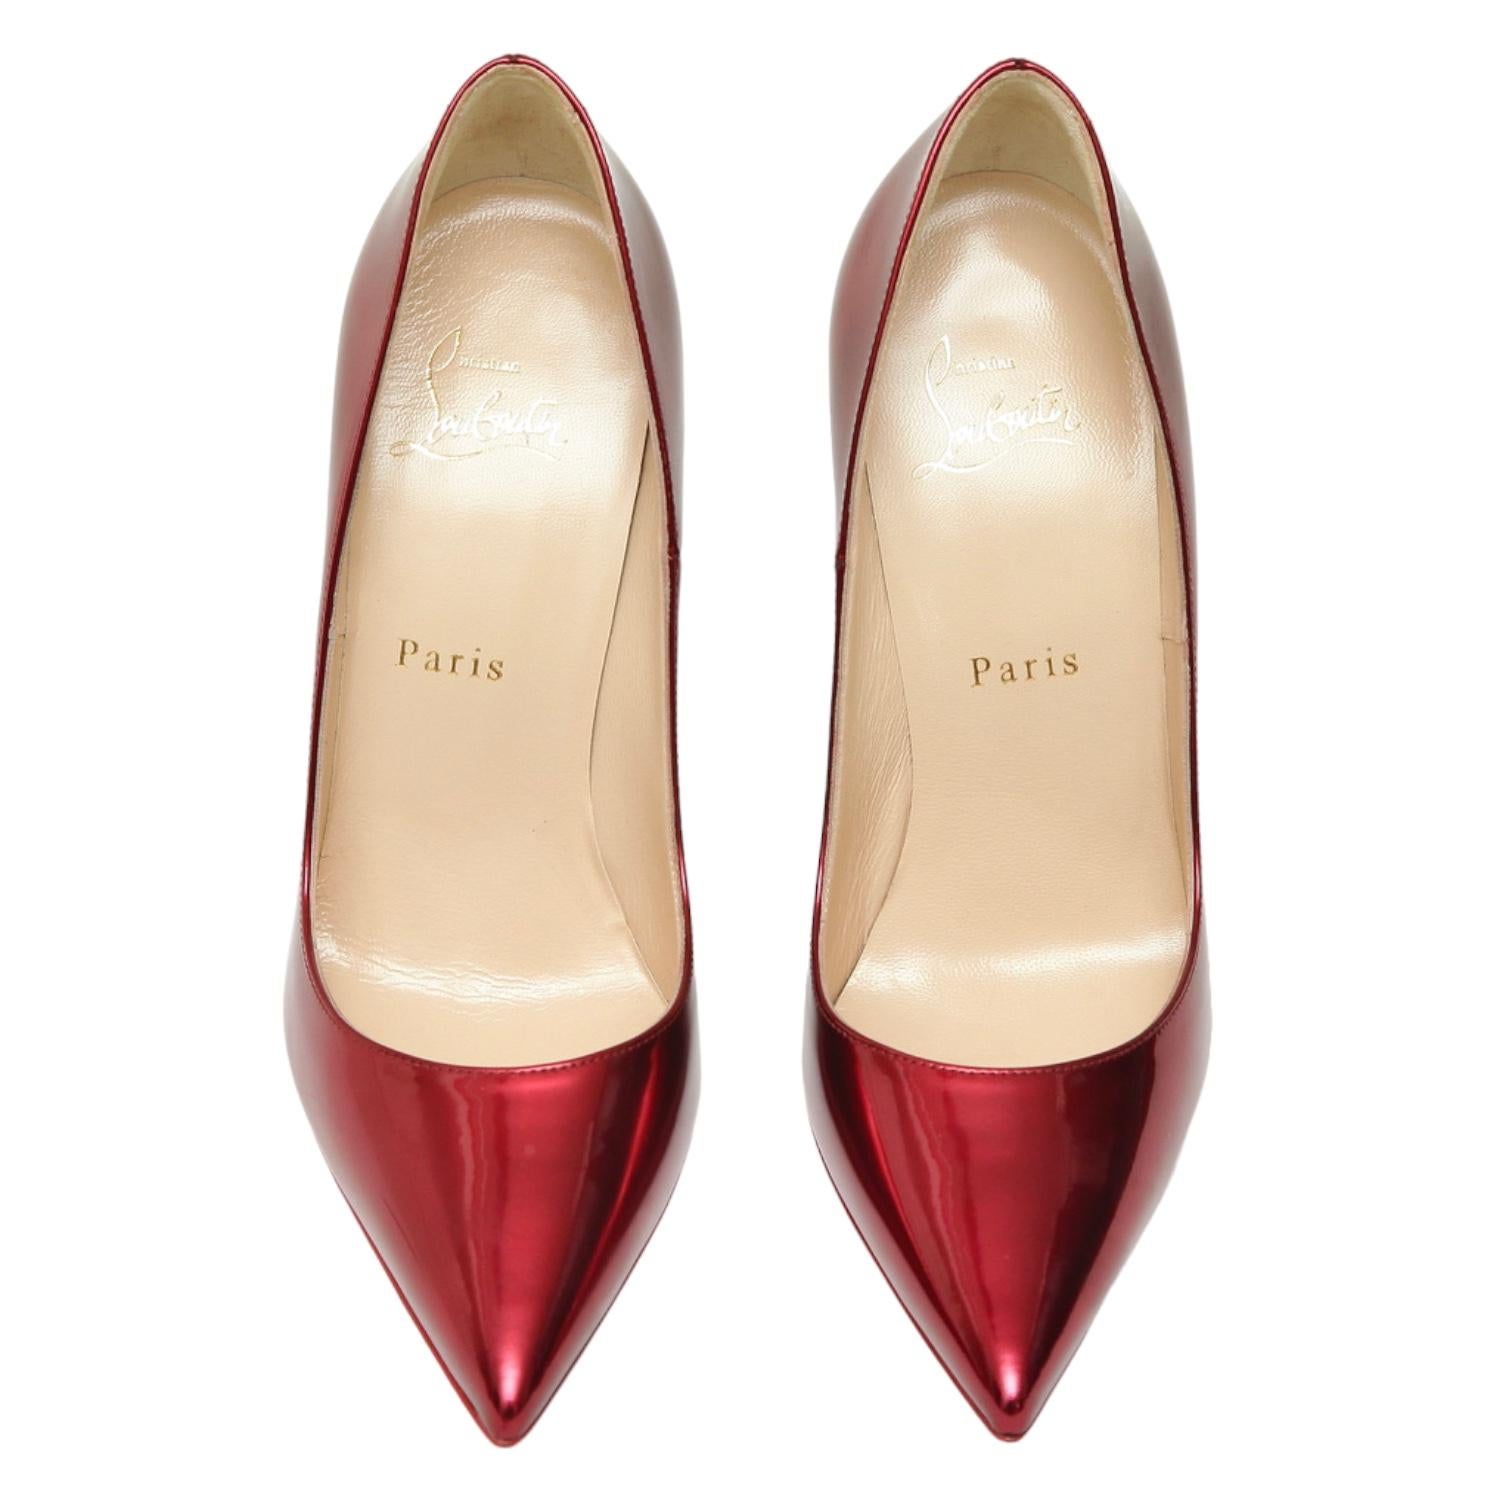 CHRISTIAN LOUBOUTIN So Kate 120 Red Patent Leather Pump Pointed Toe 38 1